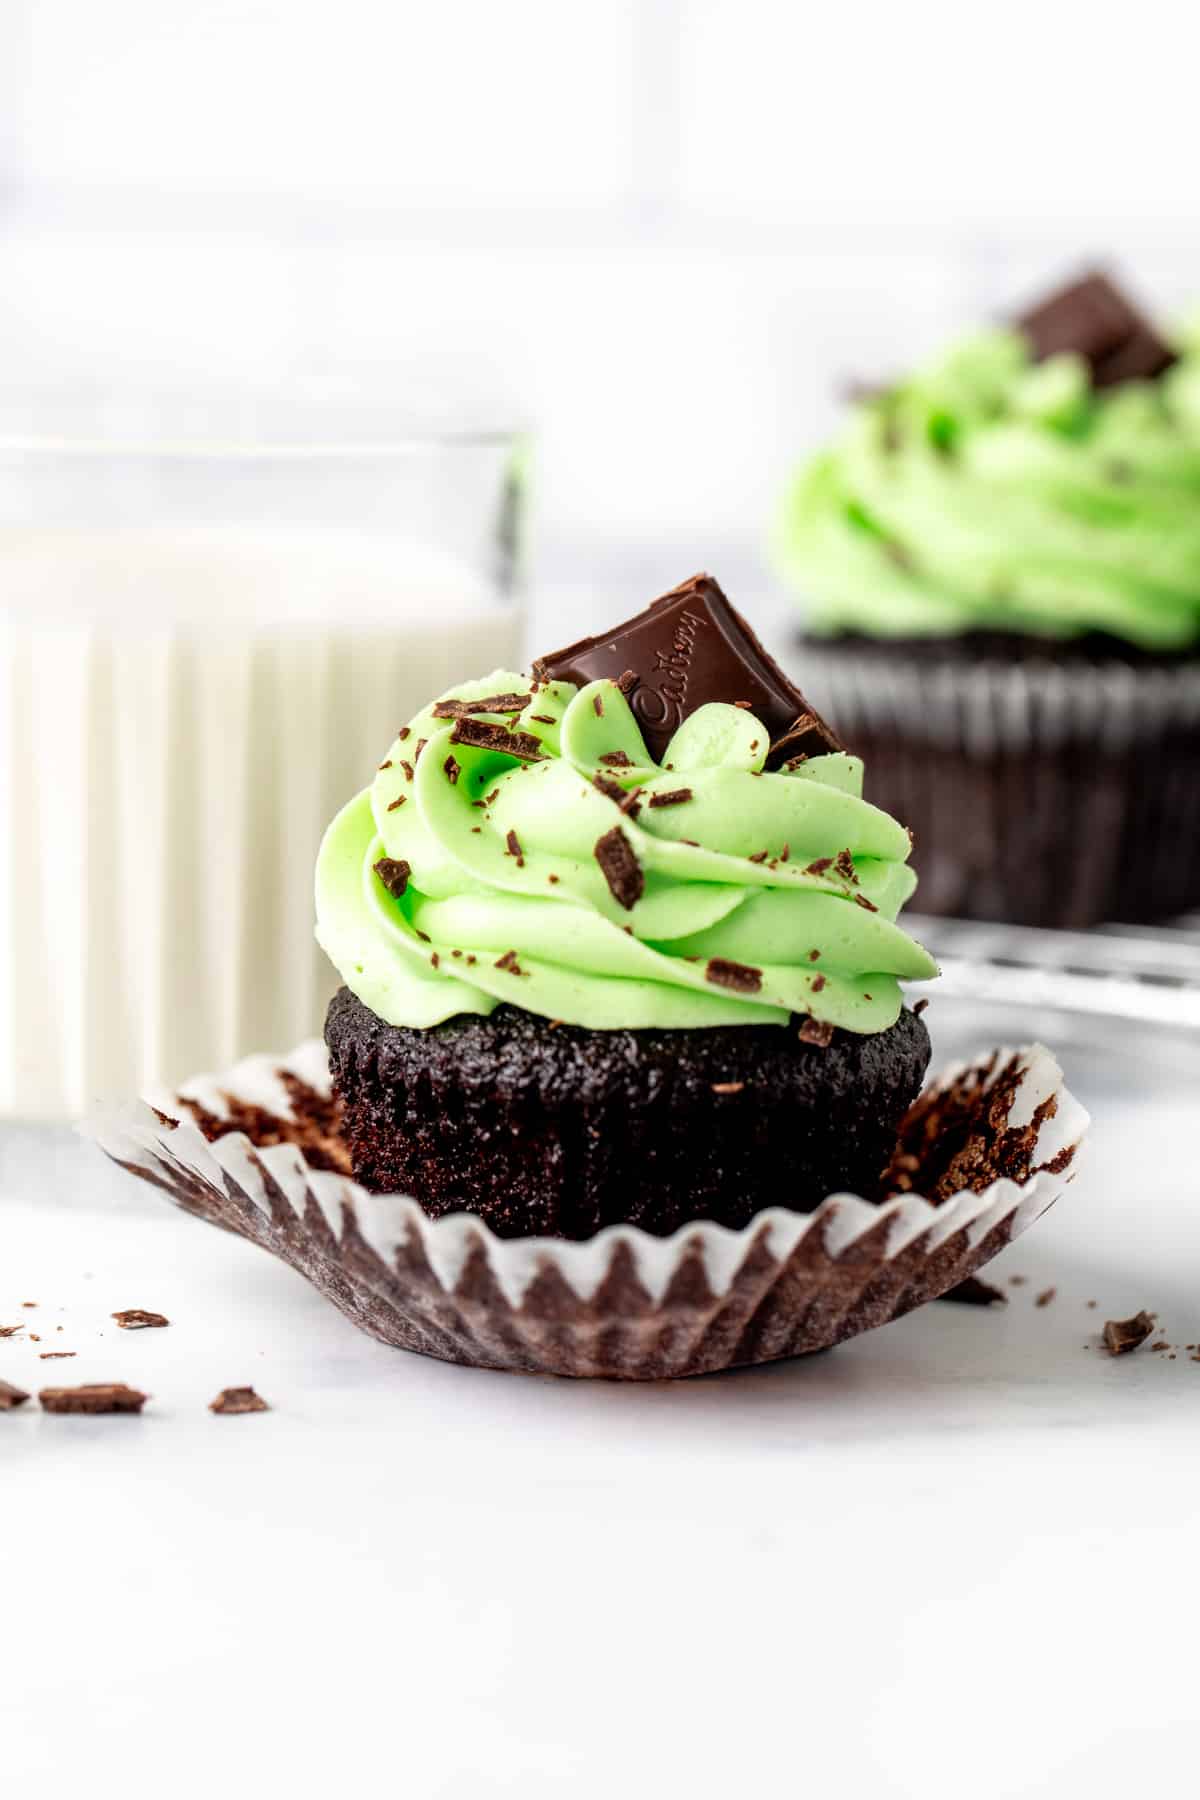 Chocolate cupcake with mint frosting and a square of chocolate on top